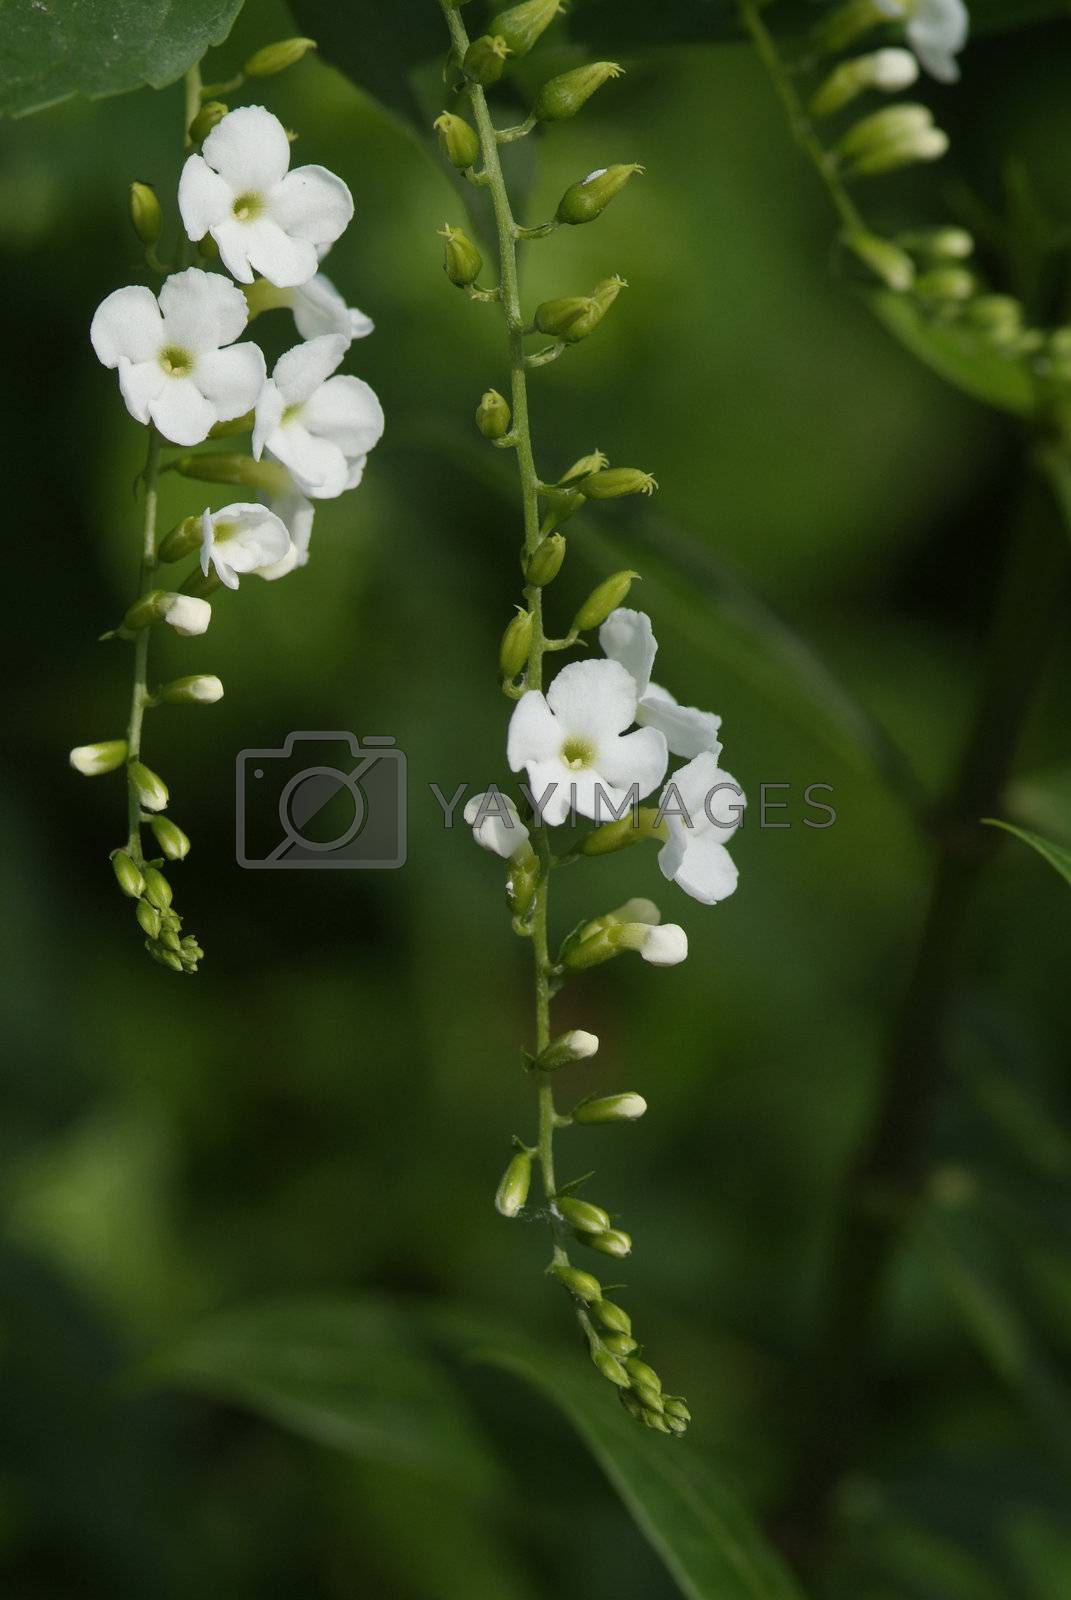 Royalty free image of White flowers on green background by epixx